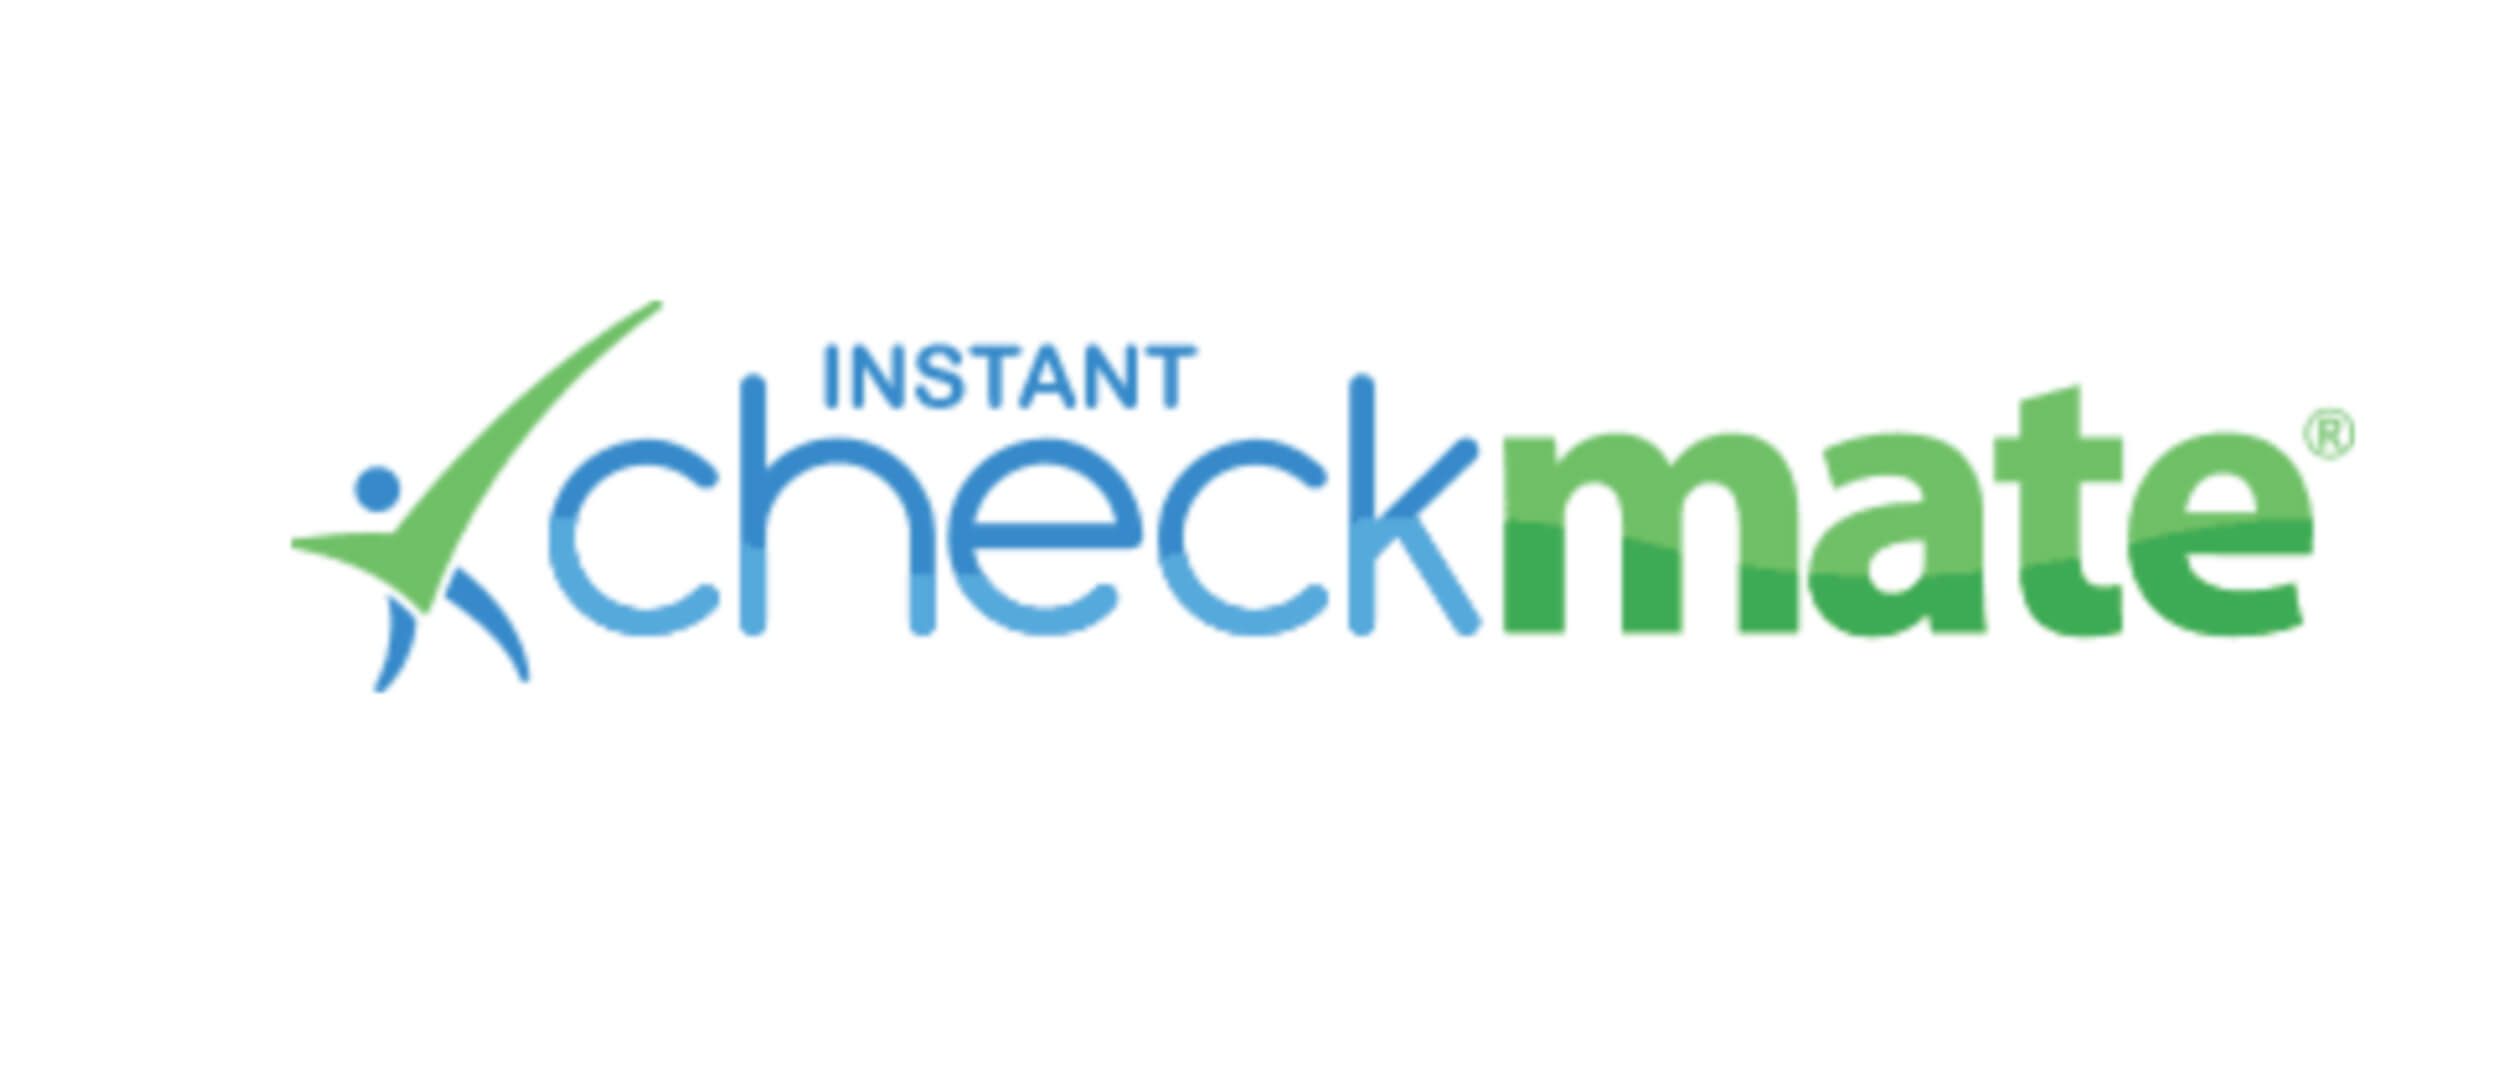 Instant Checkmate Review: Are the Results Worth the Price?